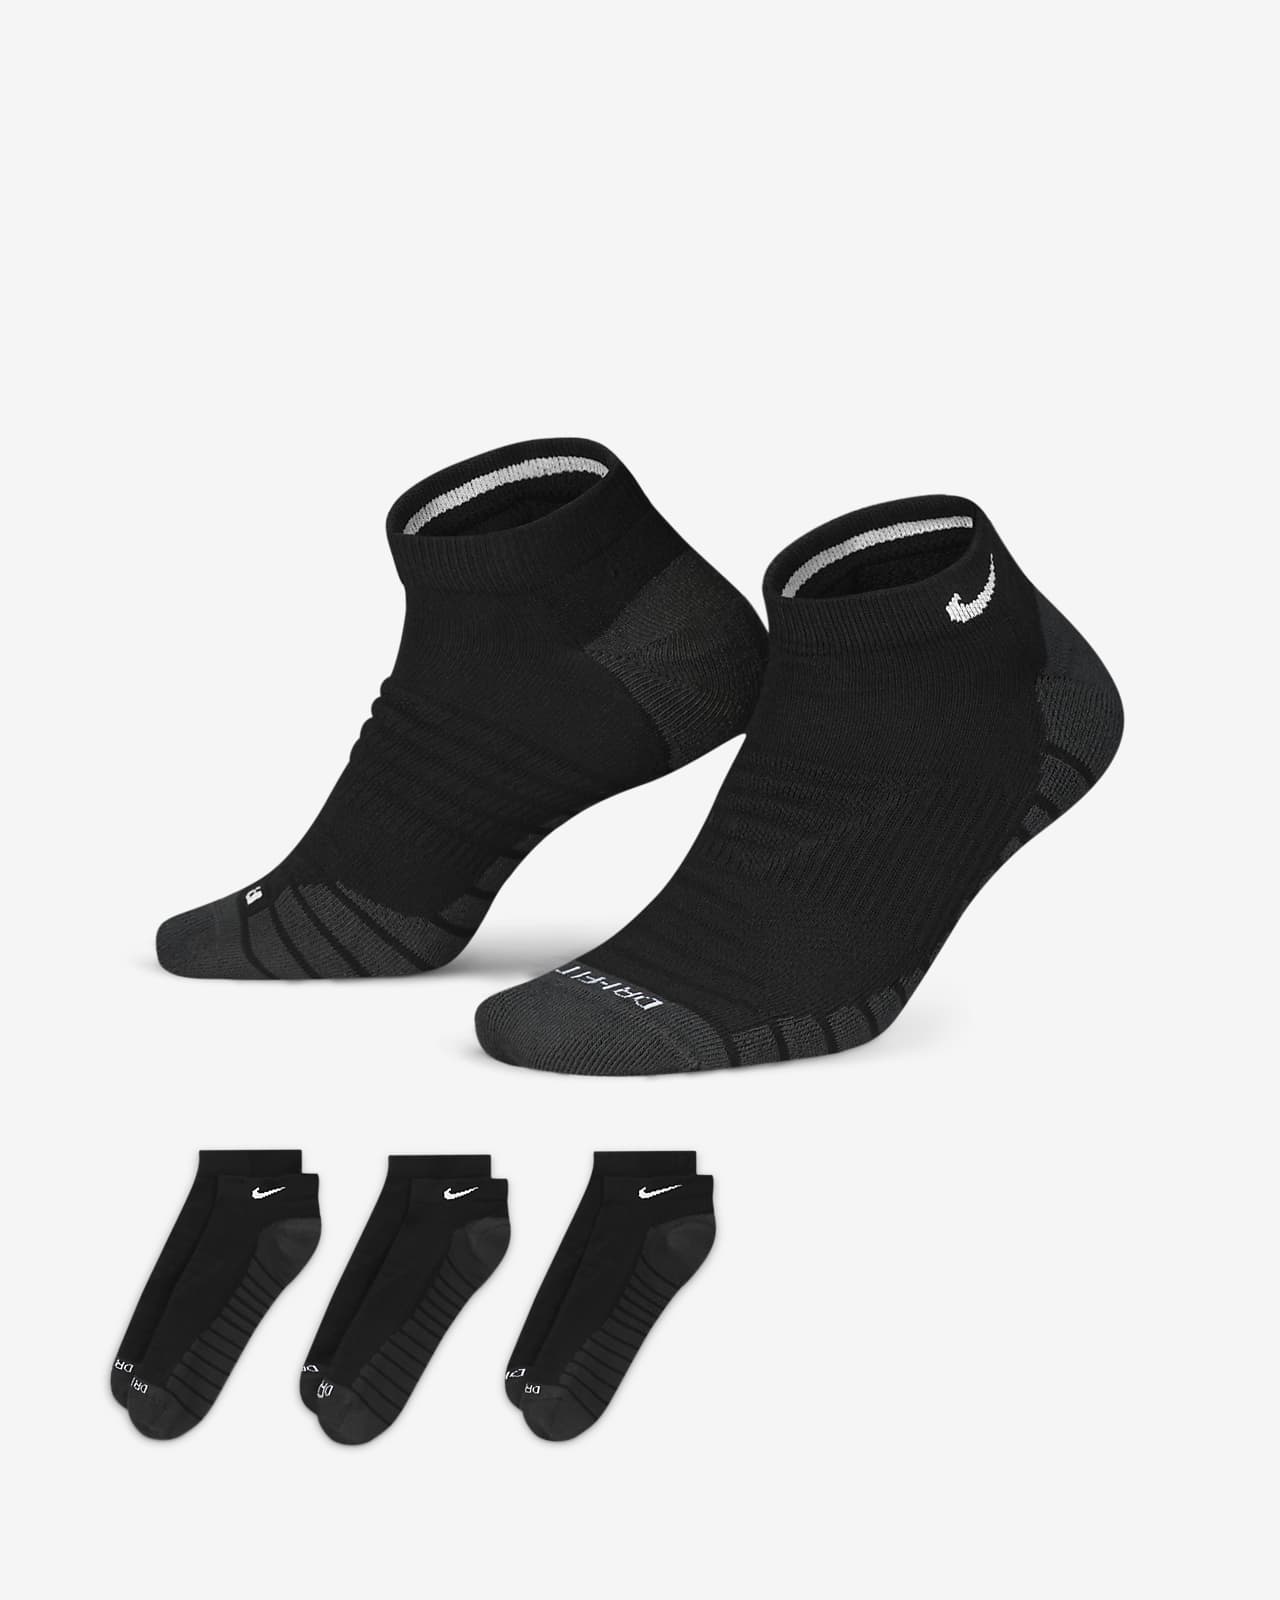 Chaussettes de training invisibles Nike Everyday Max Cushioned (3 paires)